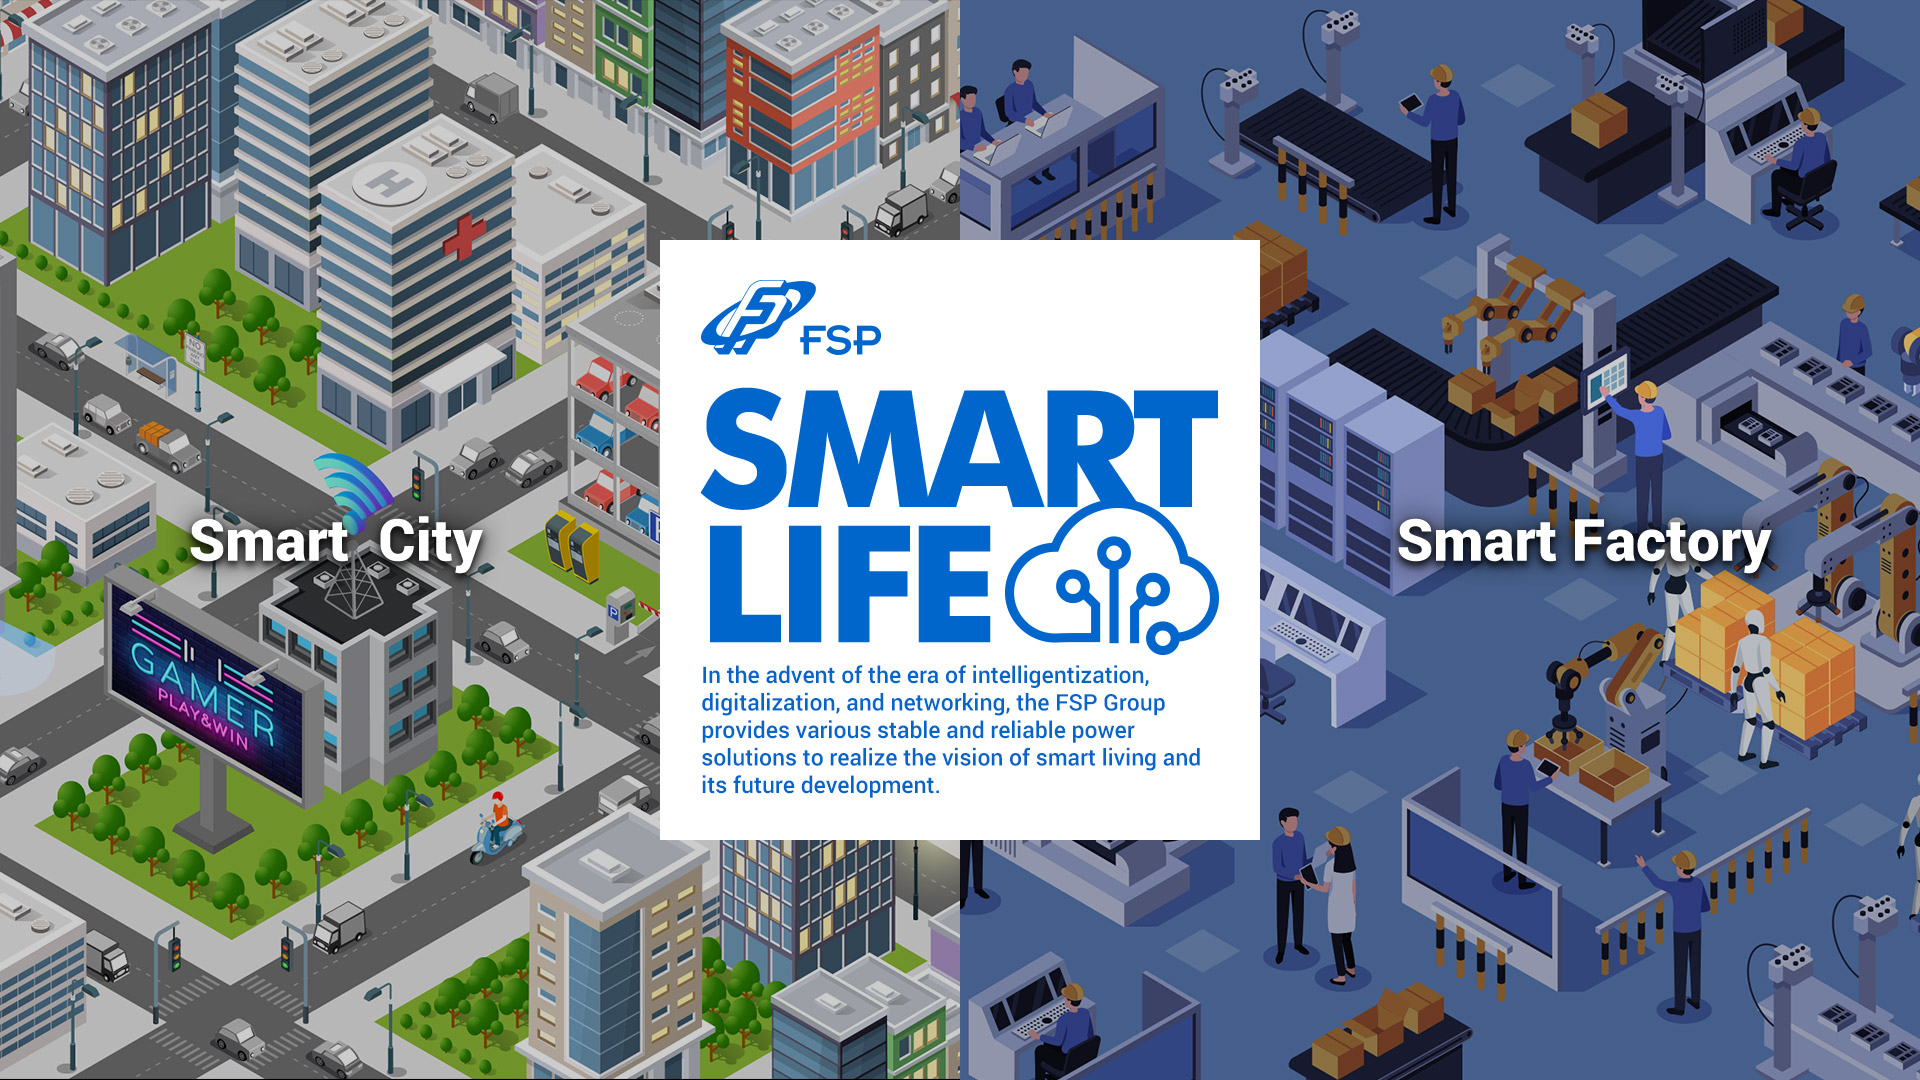 Connecting Smart Life